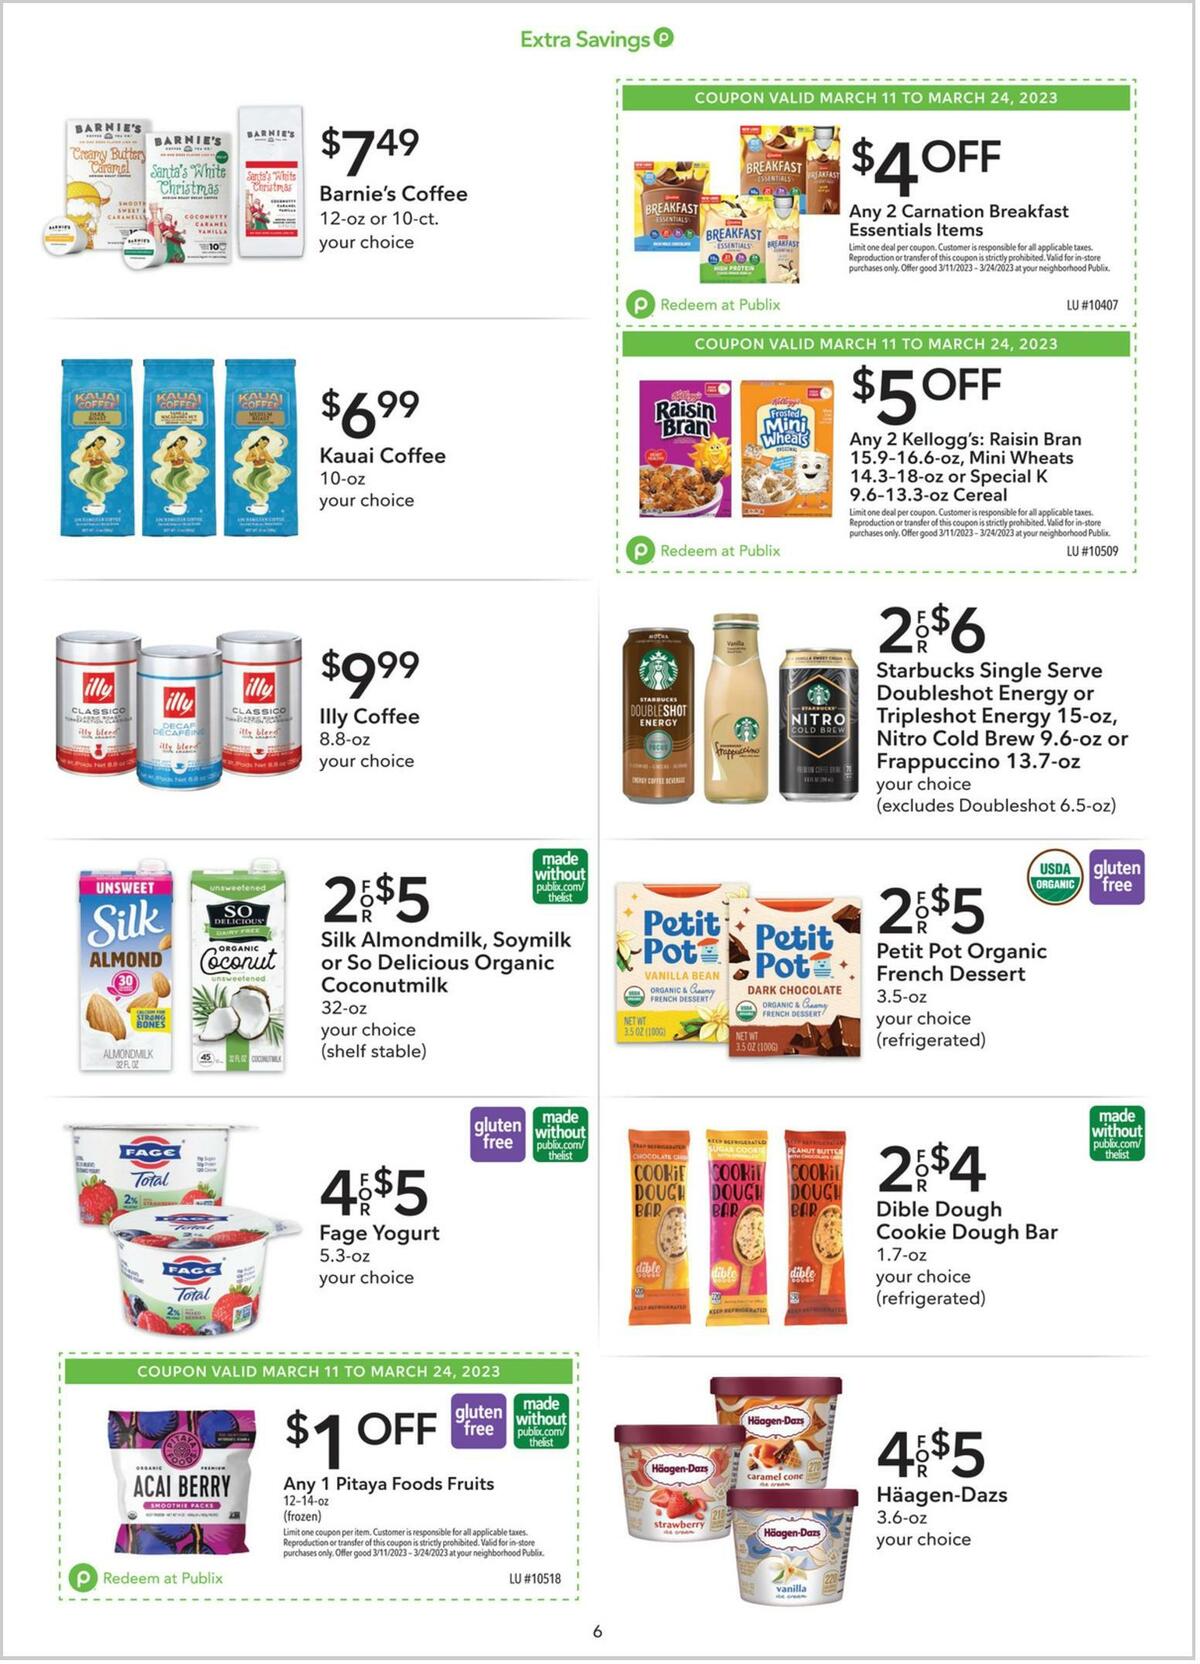 Publix Extra Savings Weekly Ad from March 11